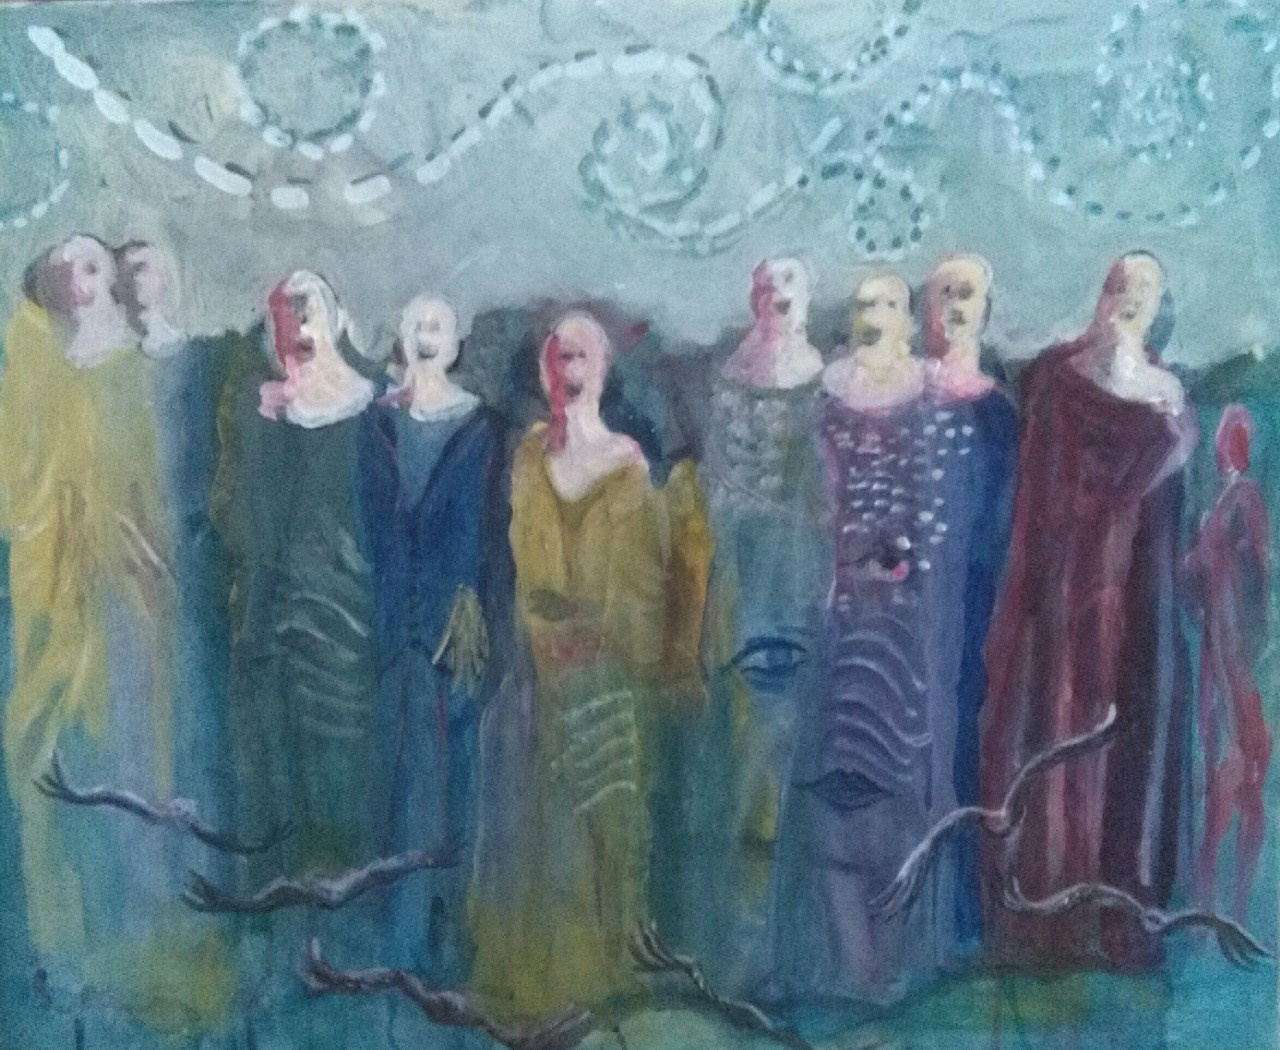 Groups of women agape looking towards the sky